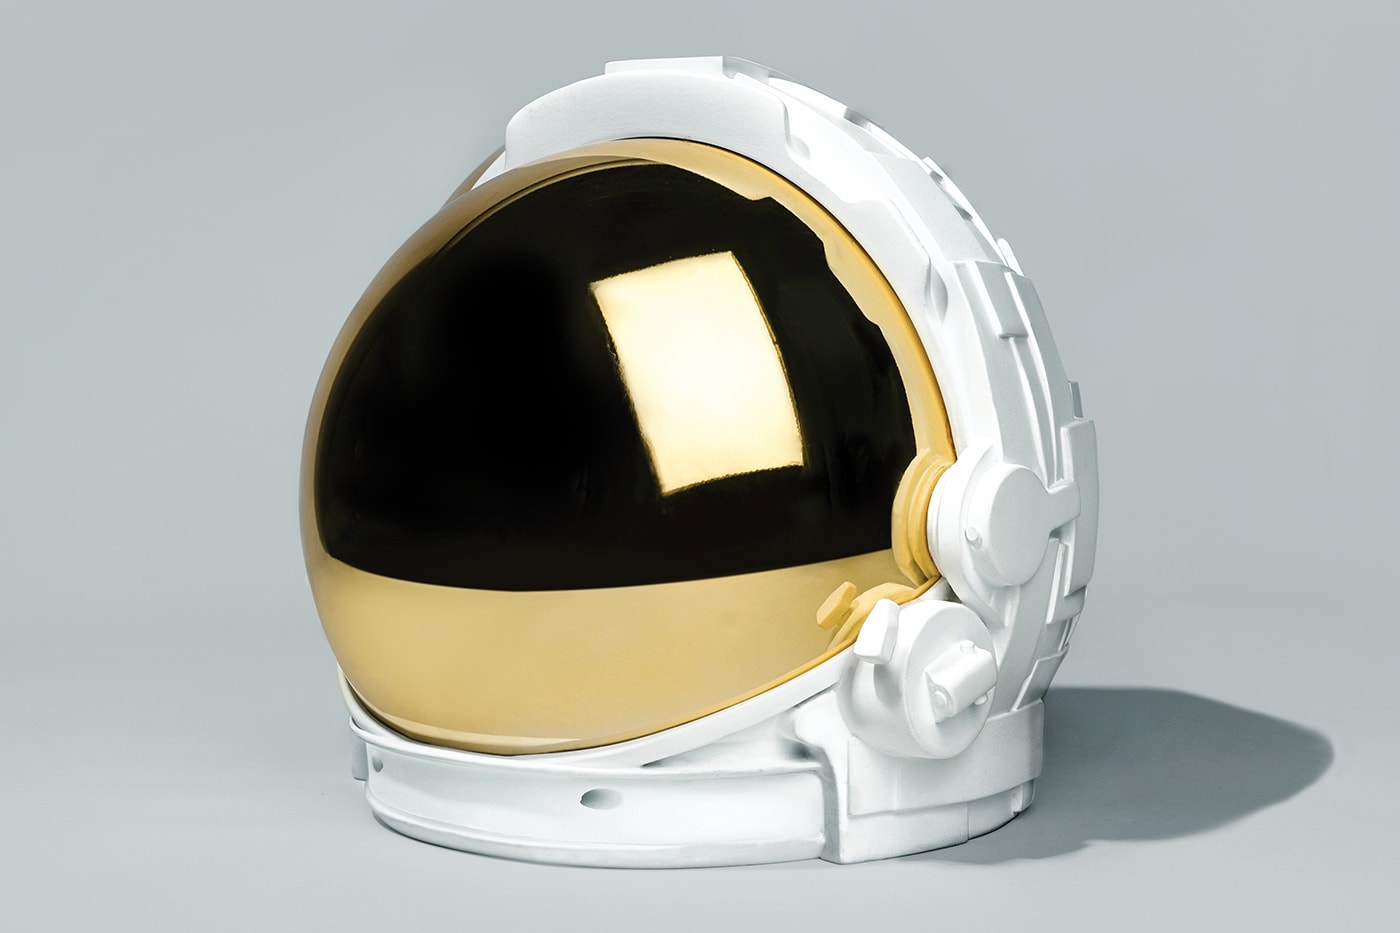 Michael Kagan Presents a Space-Faring "A7L HELMET" Collection Featuring 25 limited-edition bronze sculptures oil paintings 1/25 wooden box signature 